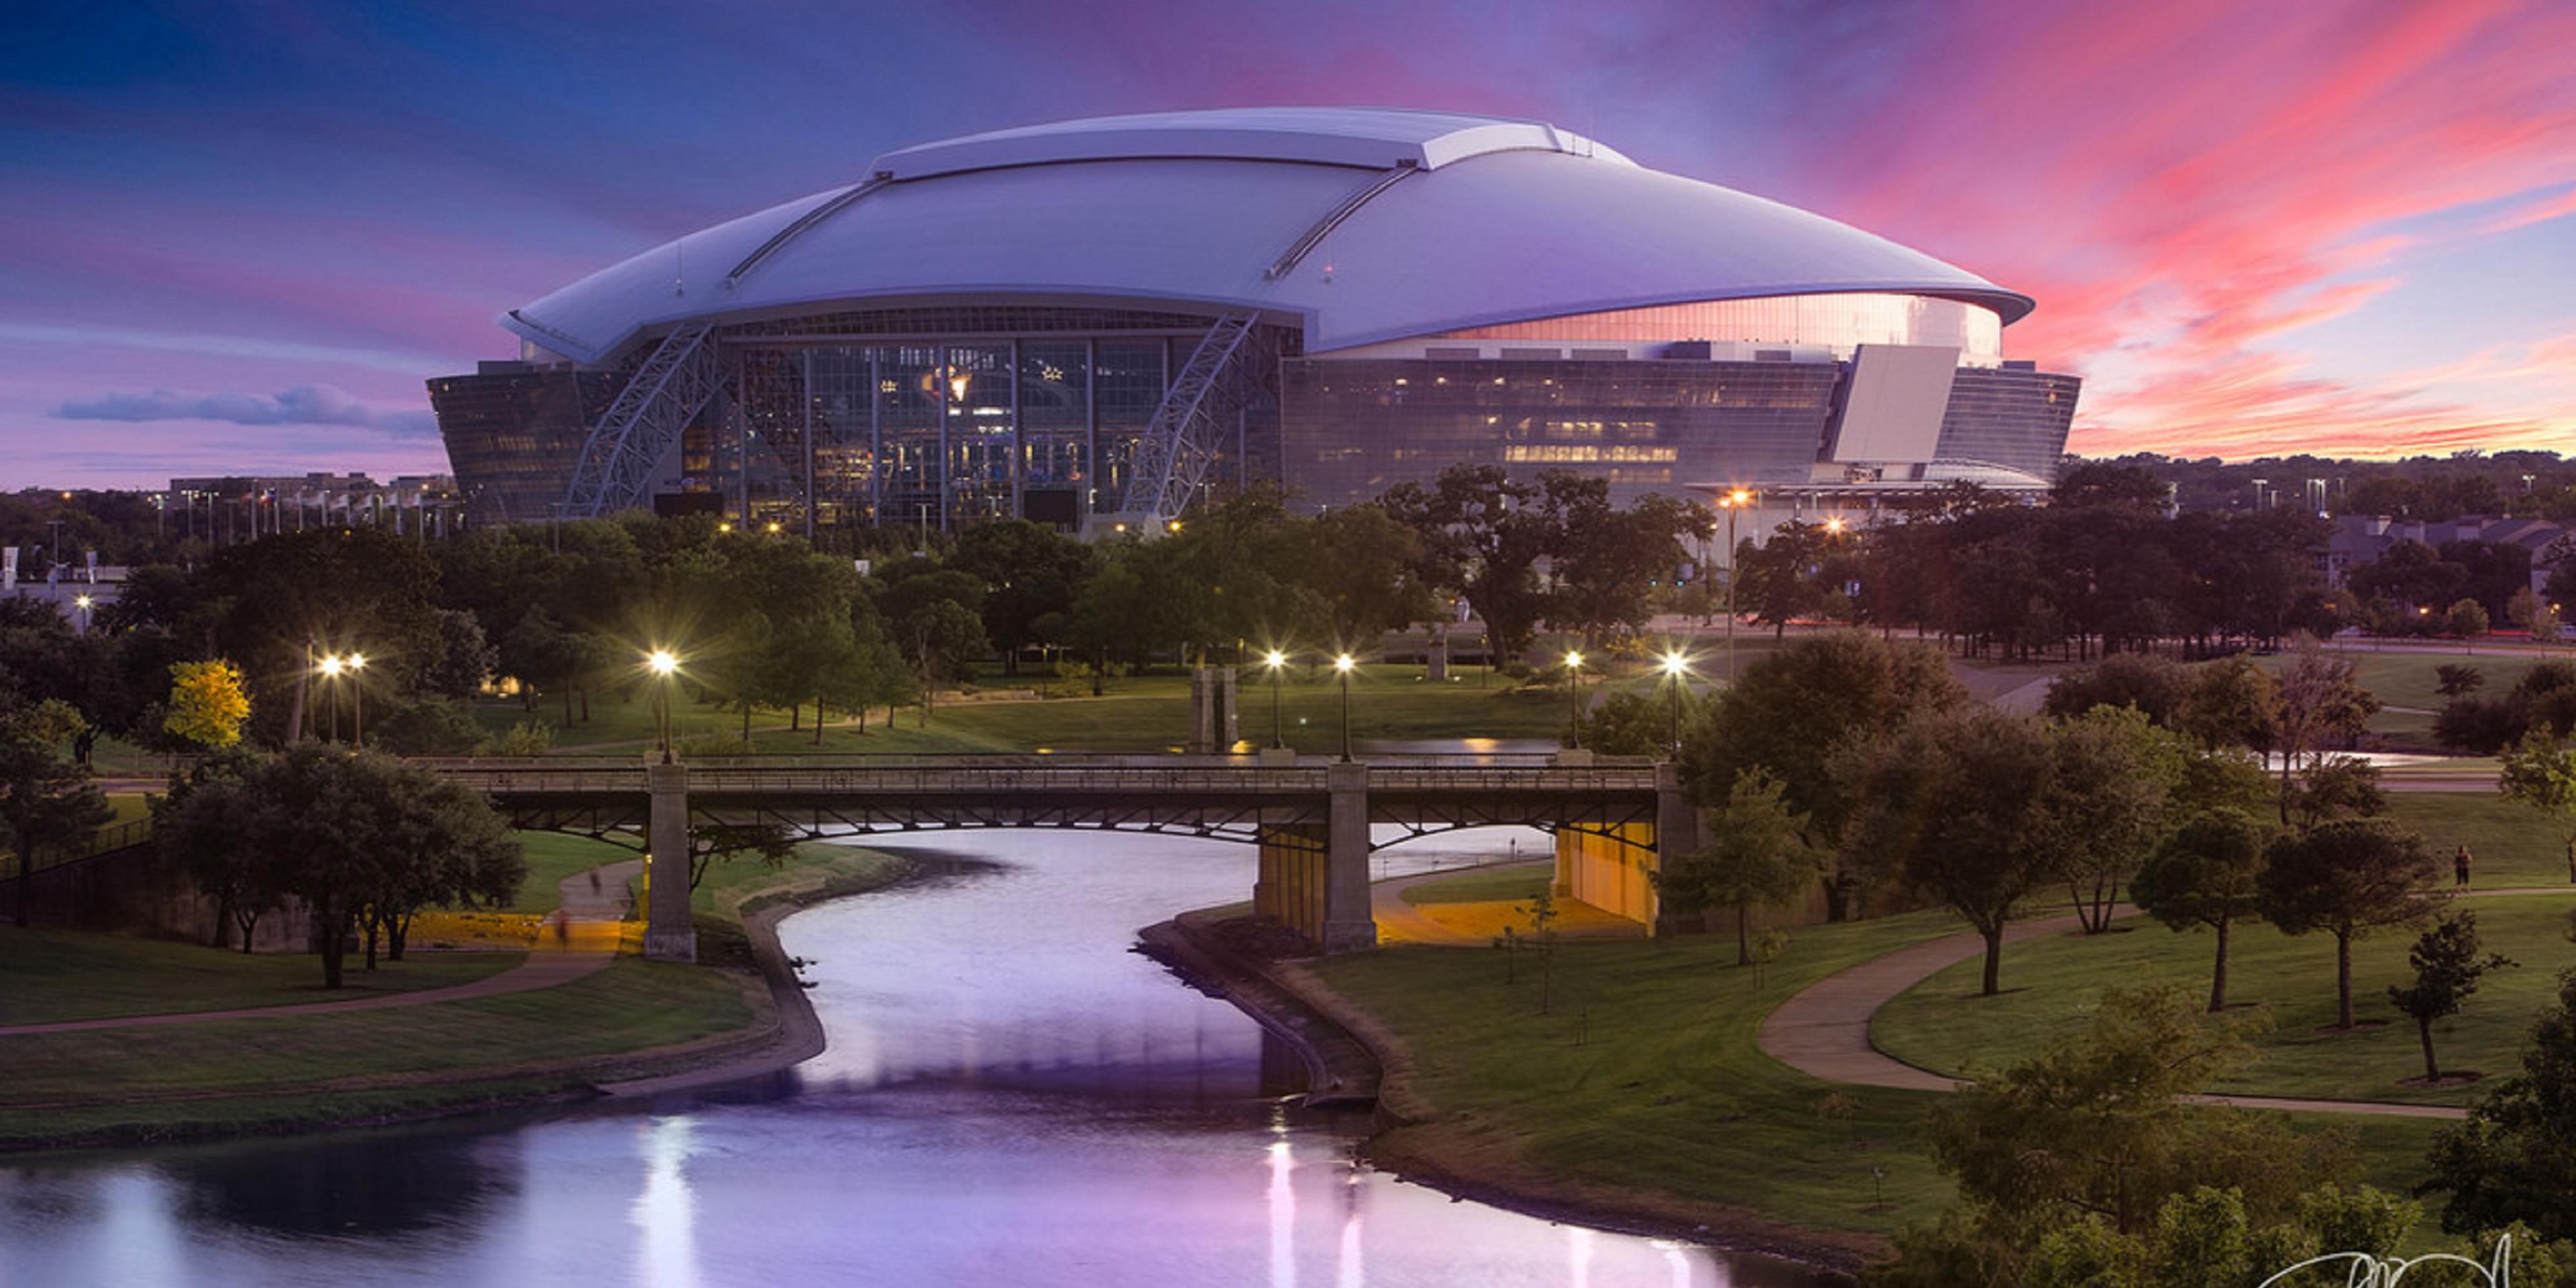 ATT Stadium, Home of the Dallas Cowboys, is just a 15 minute drive from our hotel.  We offer newly renovated guest rooms while providing affordable rates.